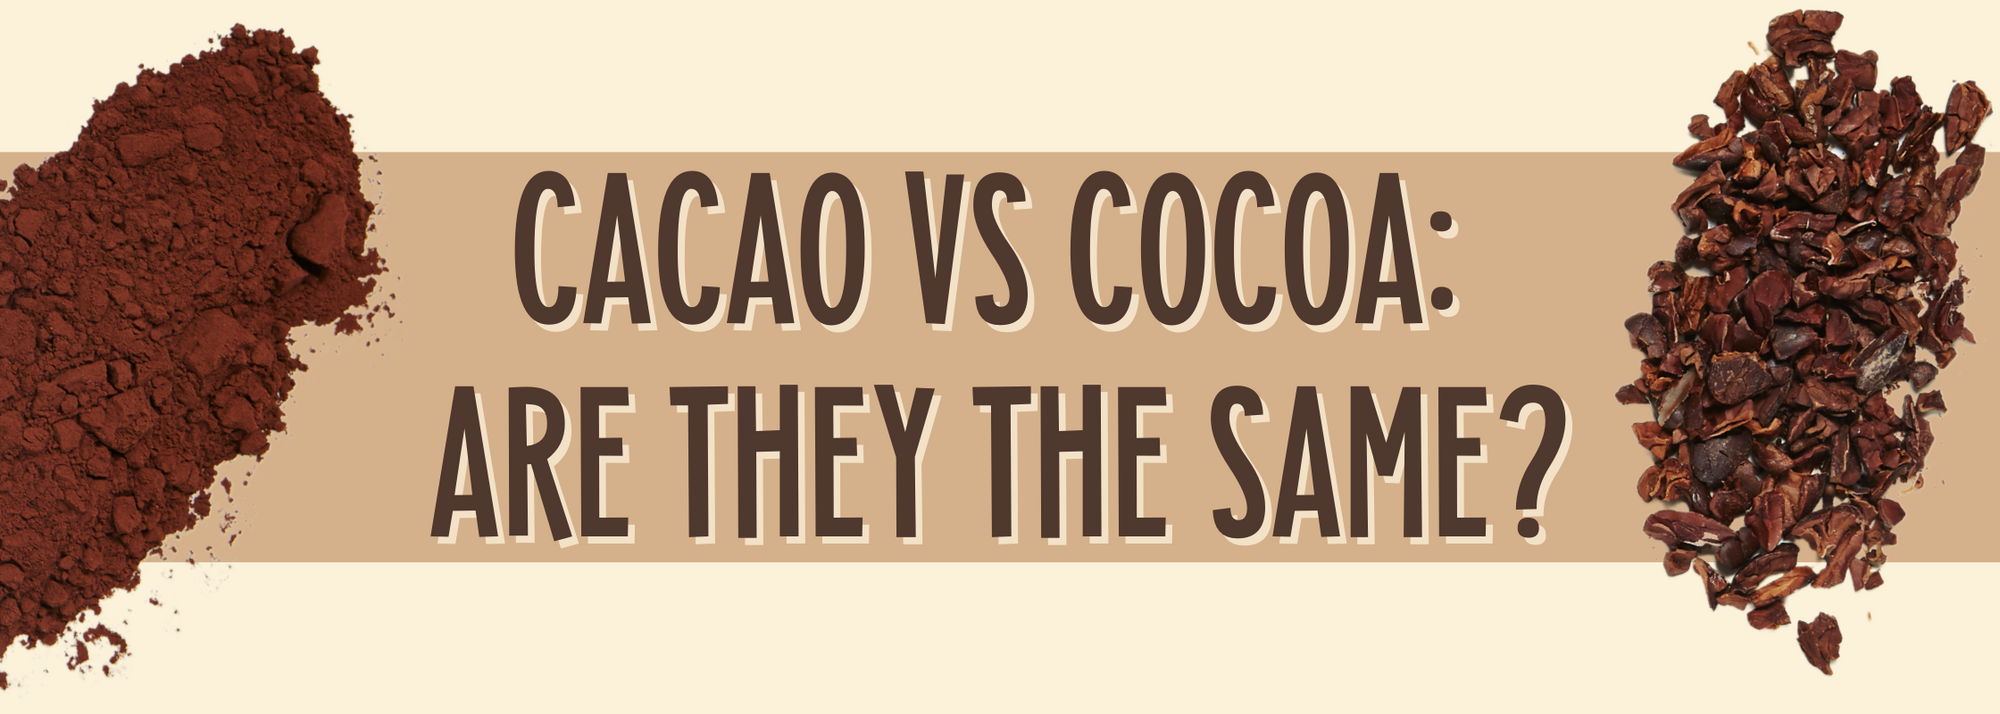 Cacao vs Cocoa: Are they the same?